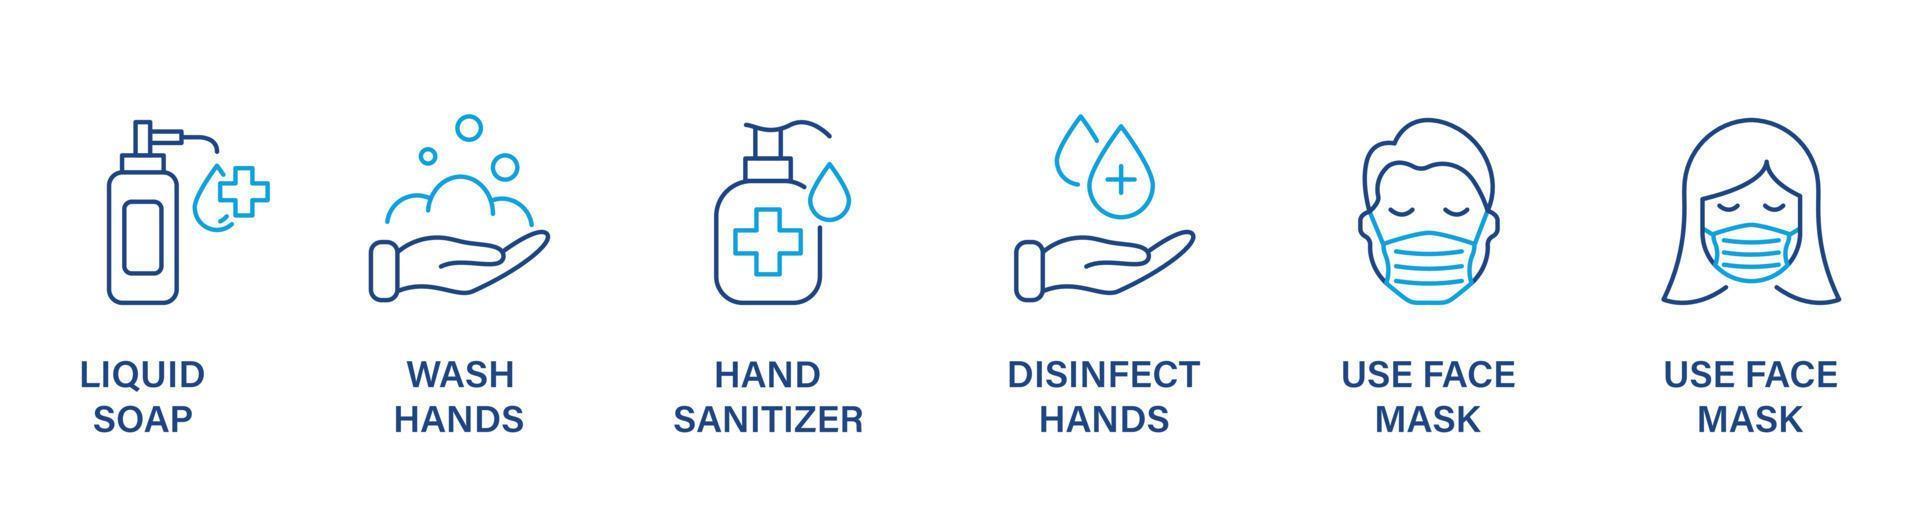 Virus Precaution Banner. Sanitizer and Liquid Soap, Wash, Disinfect Hands, Use Face Mask Icon. Coronavirus Prevention Line Icon Set. Sign for Medical Poster. Editable stroke. Vector illustration.